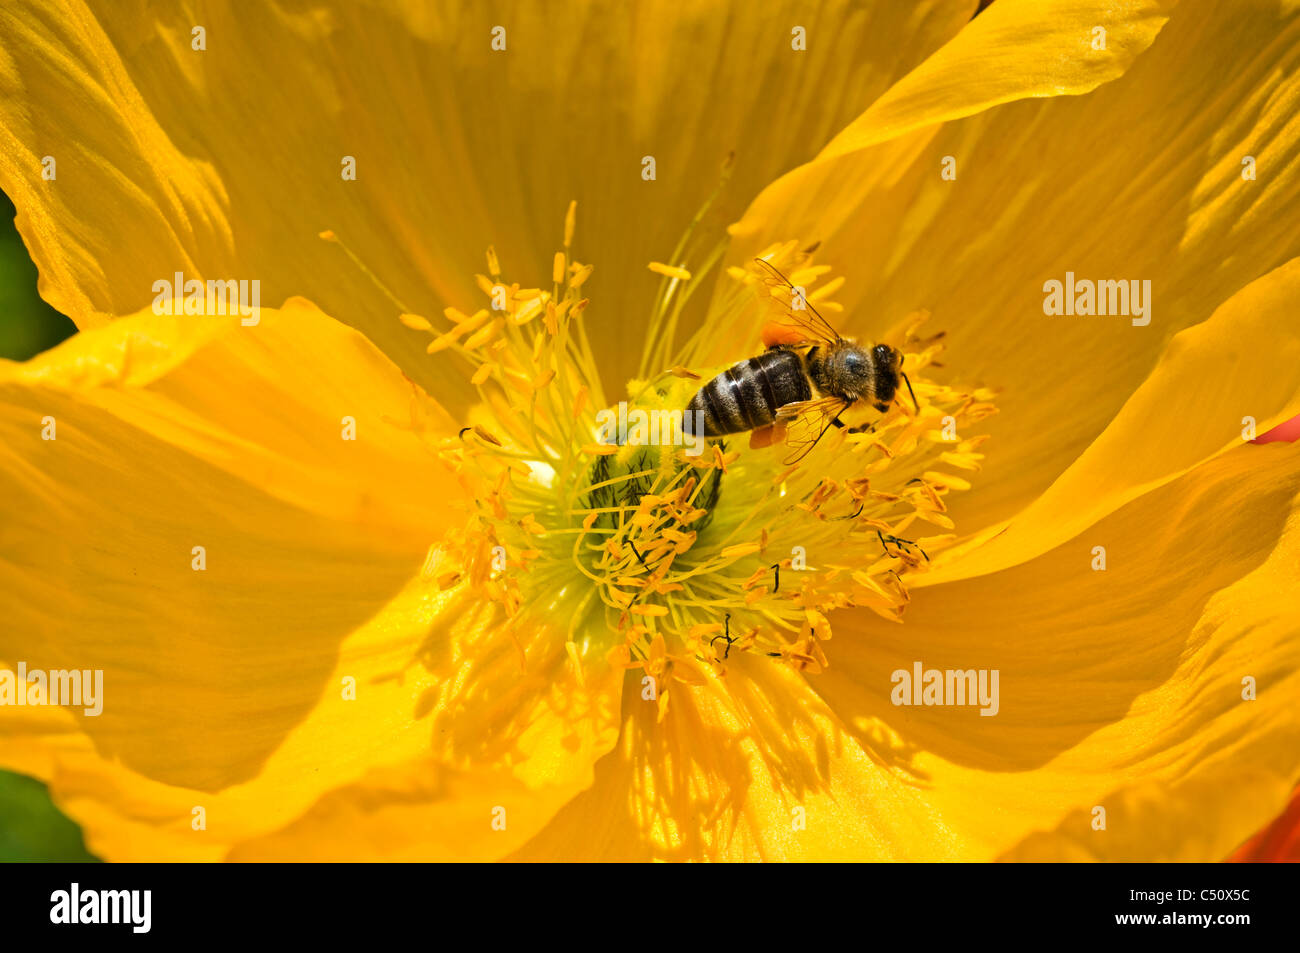 Large tropical flowers with honeybee Stock Photo